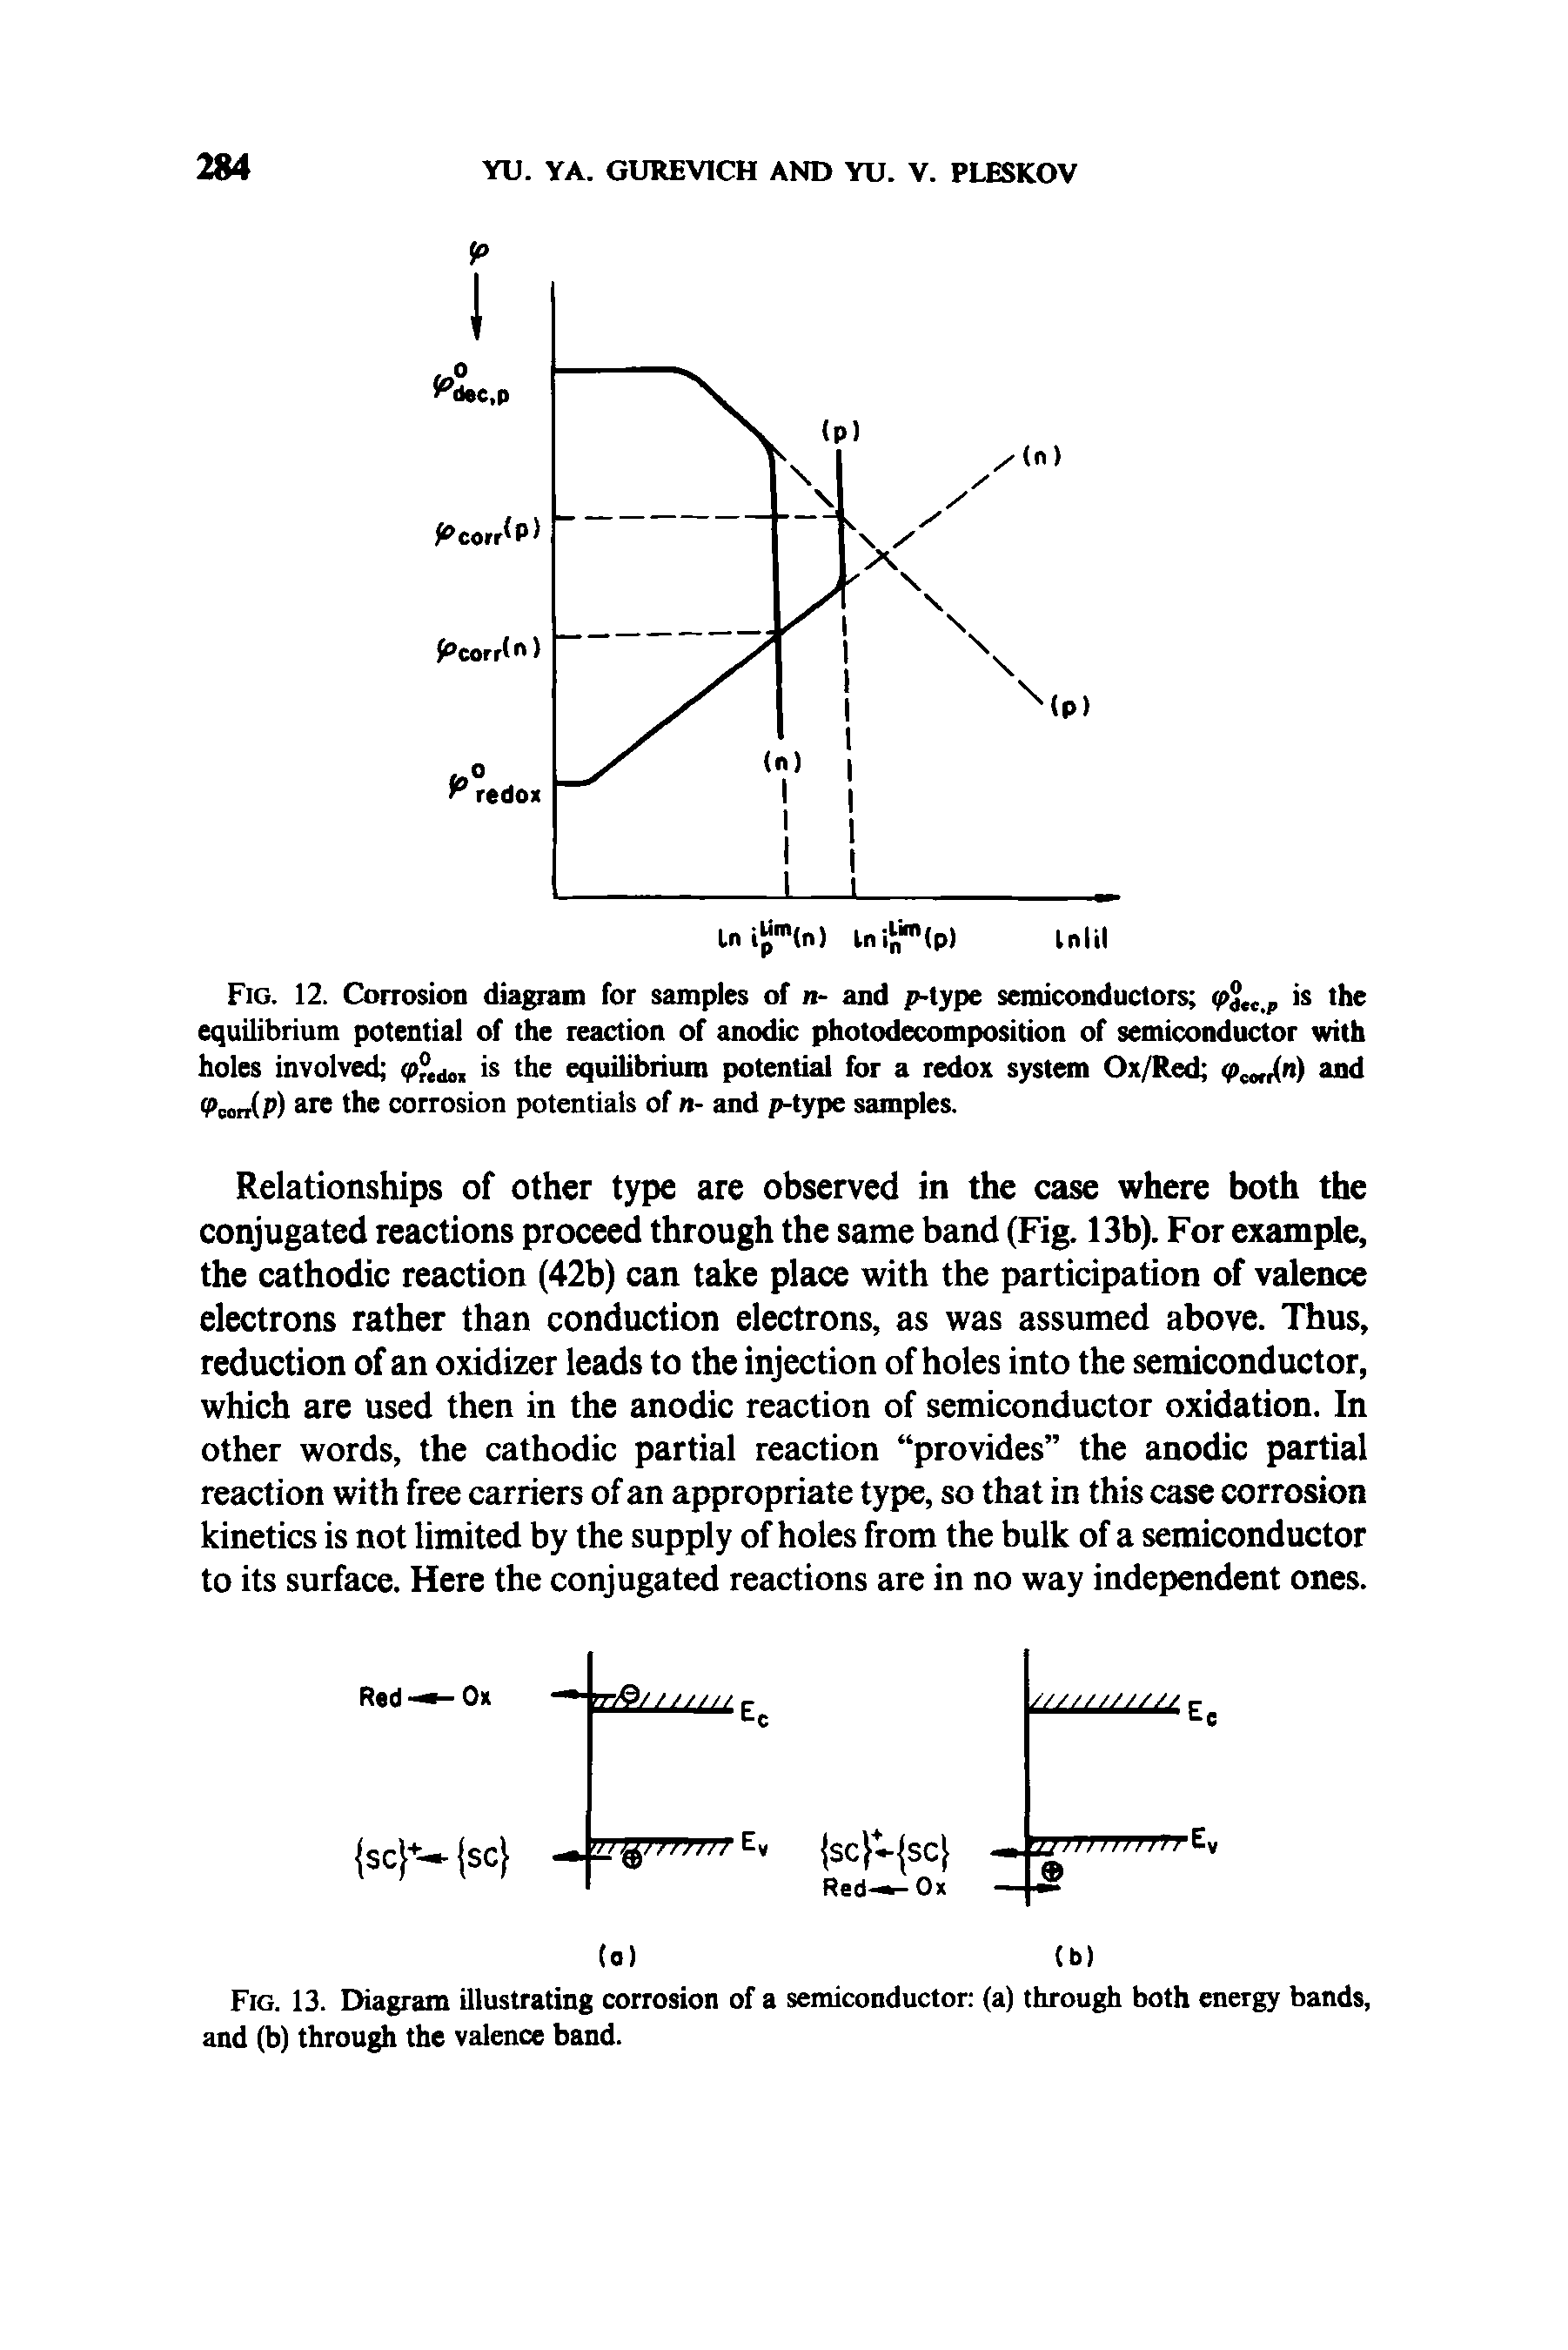 Fig. 12. Corrosion diagram for samples of n- and p-type semiconductors <p° .P >s the equilibrium potential of the reaction of anodic photodecomposition of semiconductor with holes involved ( ° , is the equilibrium potential for a redox system /Red (/>cwr(n) and <pM (p) are the corrosion potentials of n- and p-type samples.